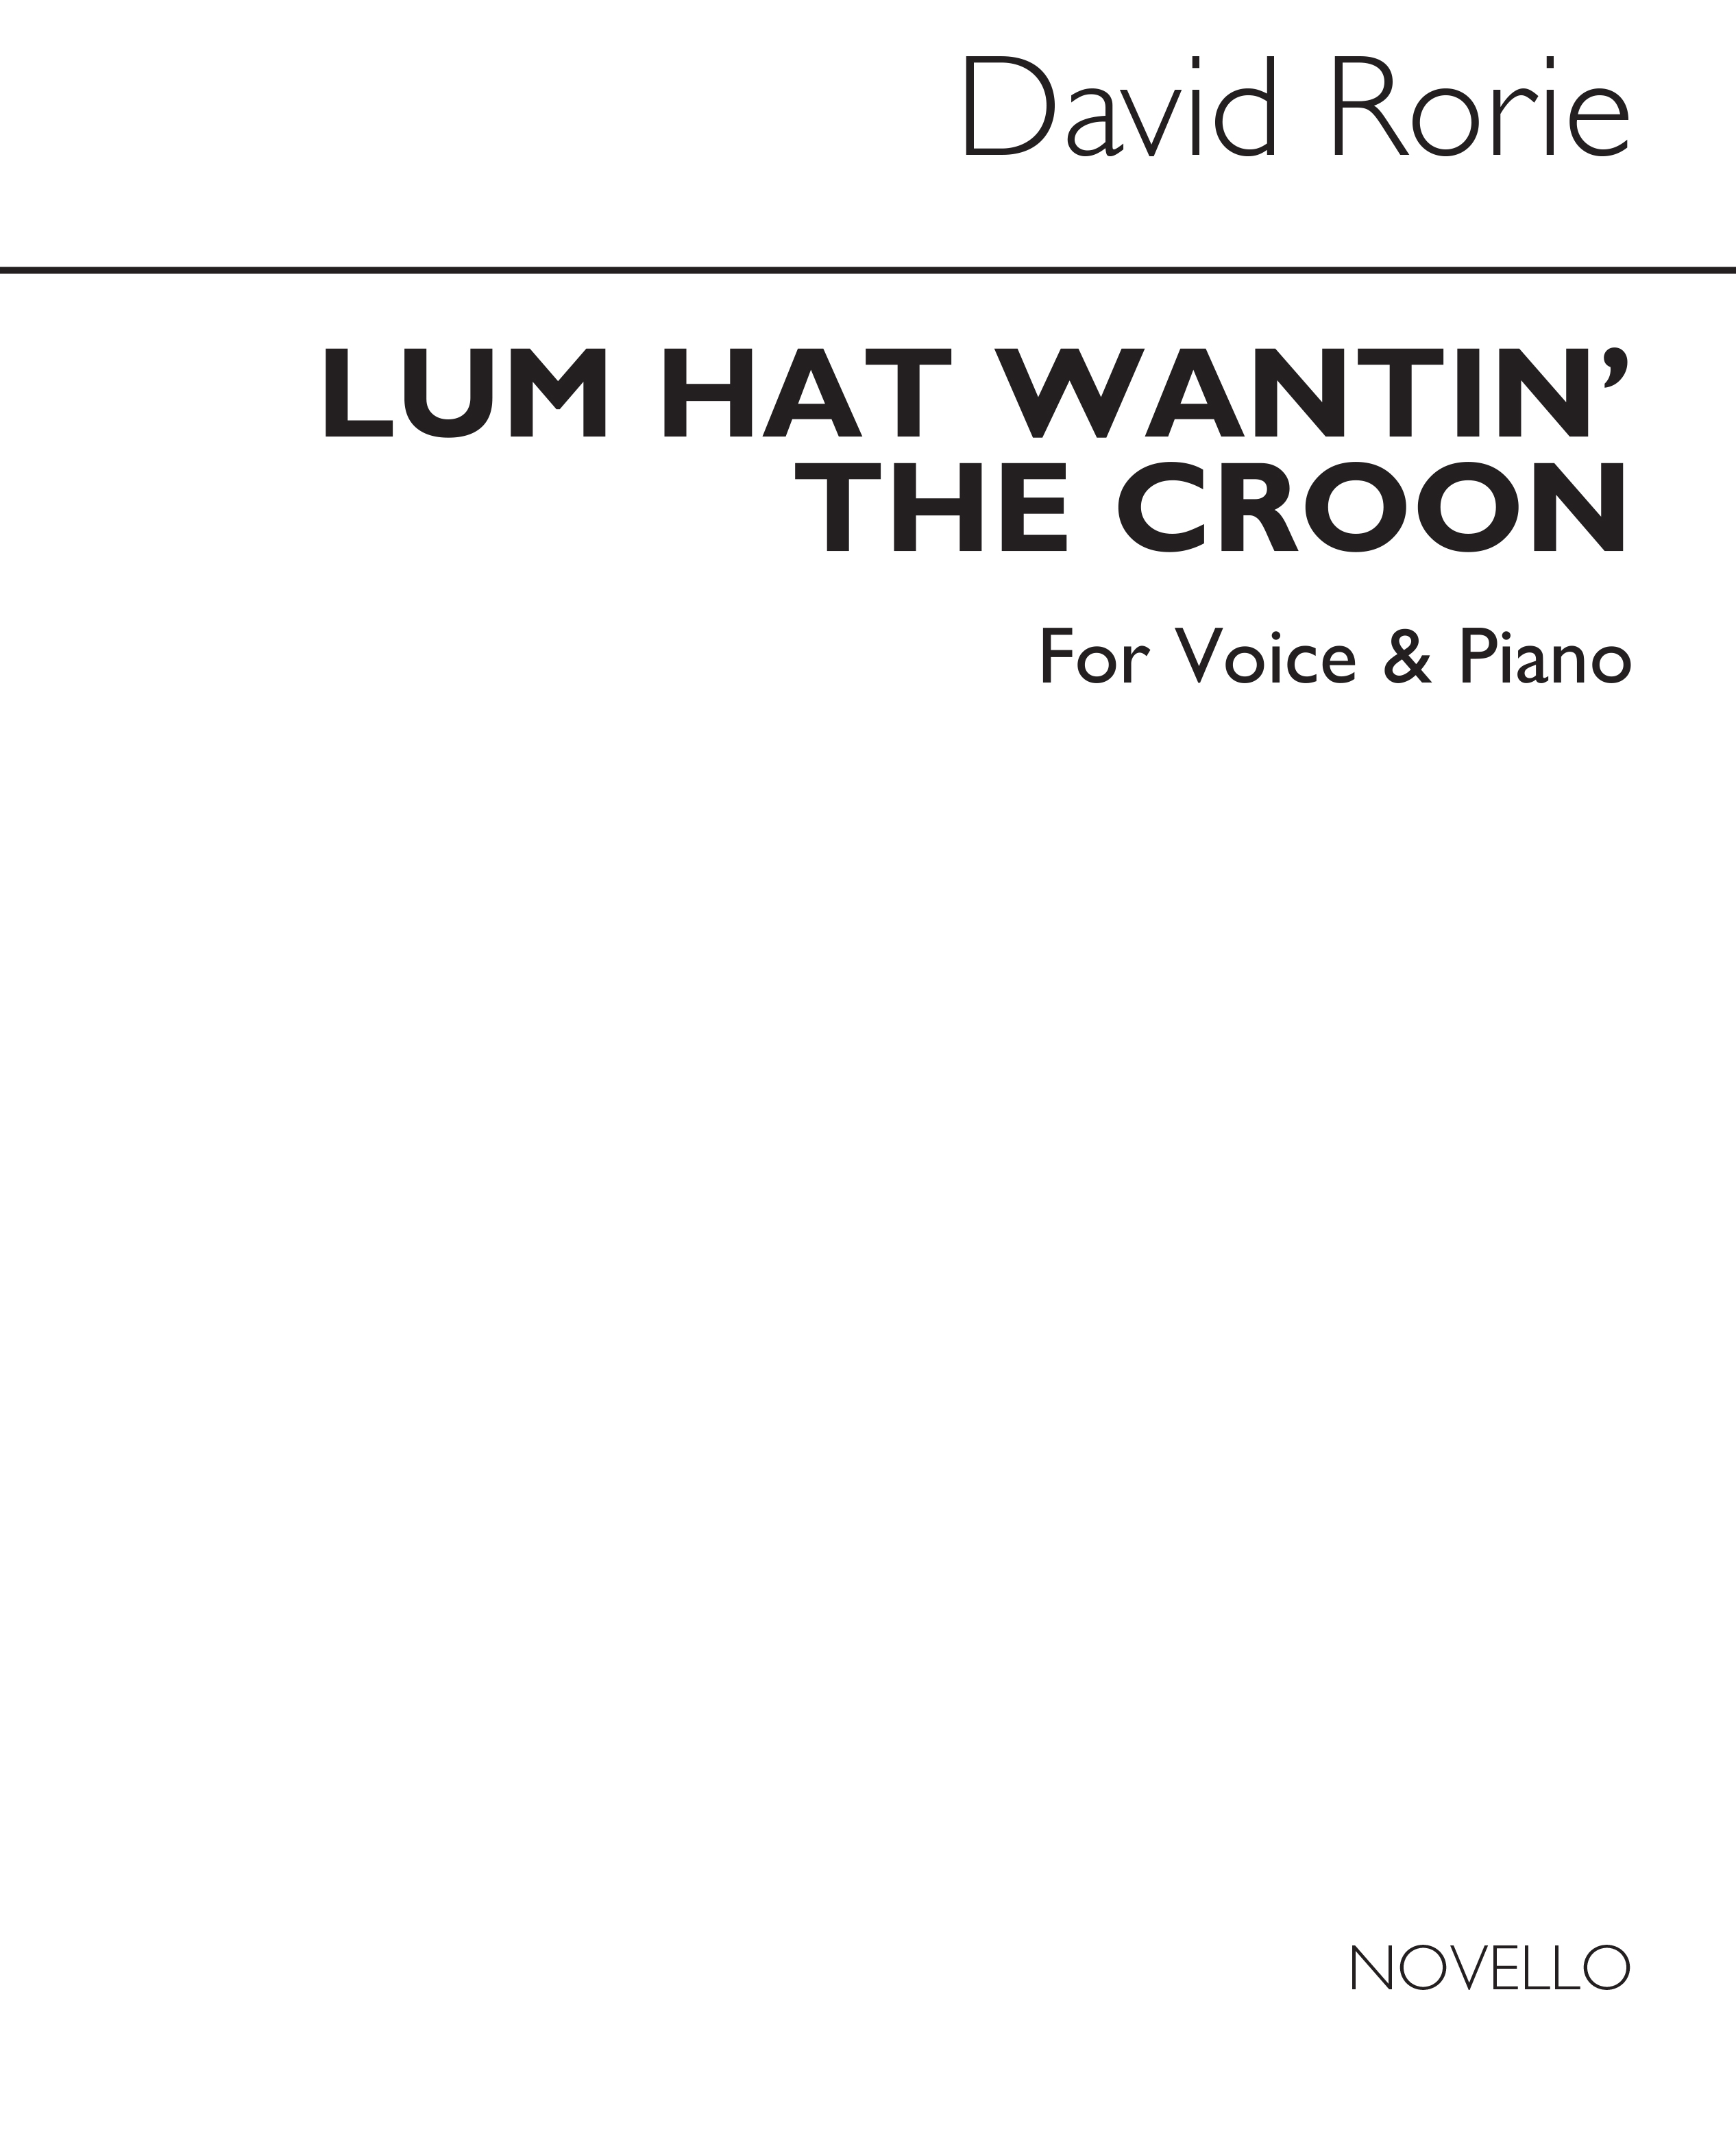 David Rorie: The Lum Hat Wantin' The Croon Voice/Piano